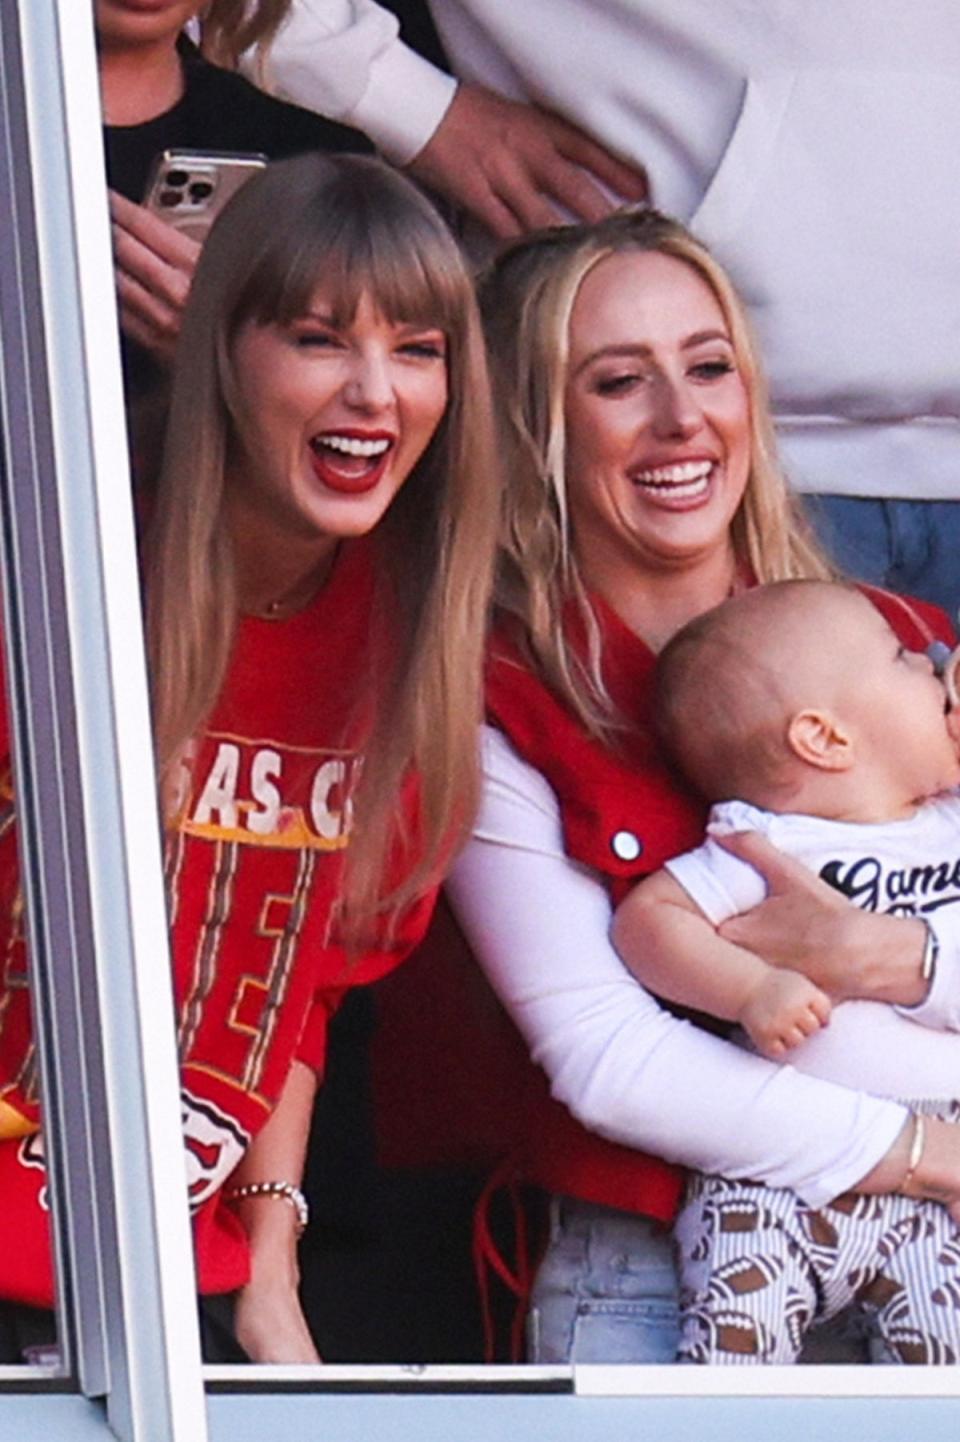 Big lols: Swift attends an American football game with new BFF Brittany Mahomes in October (Getty)